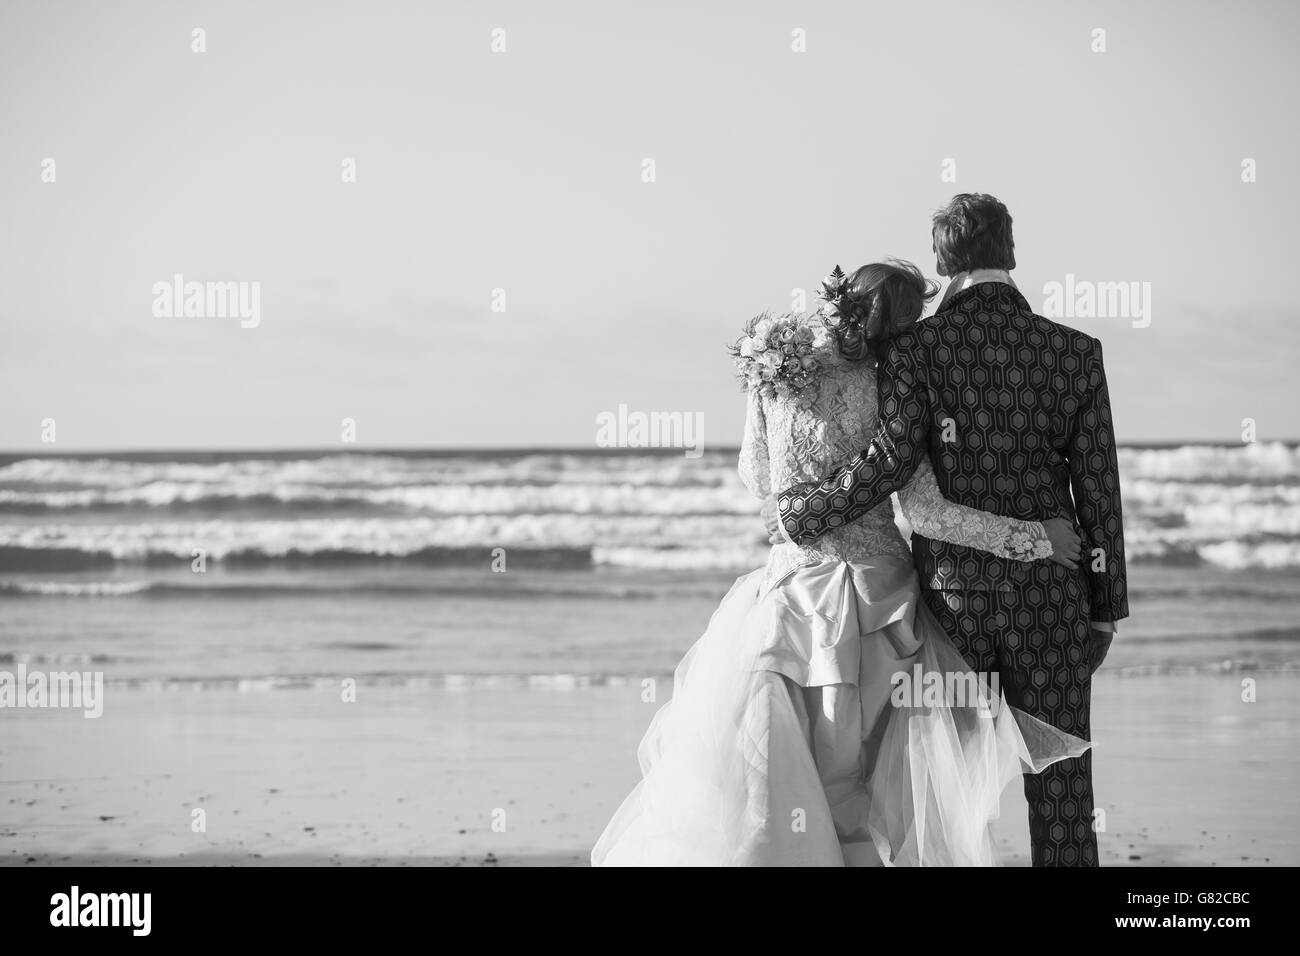 Rear view of bride and groom standing arm around at beach Stock Photo